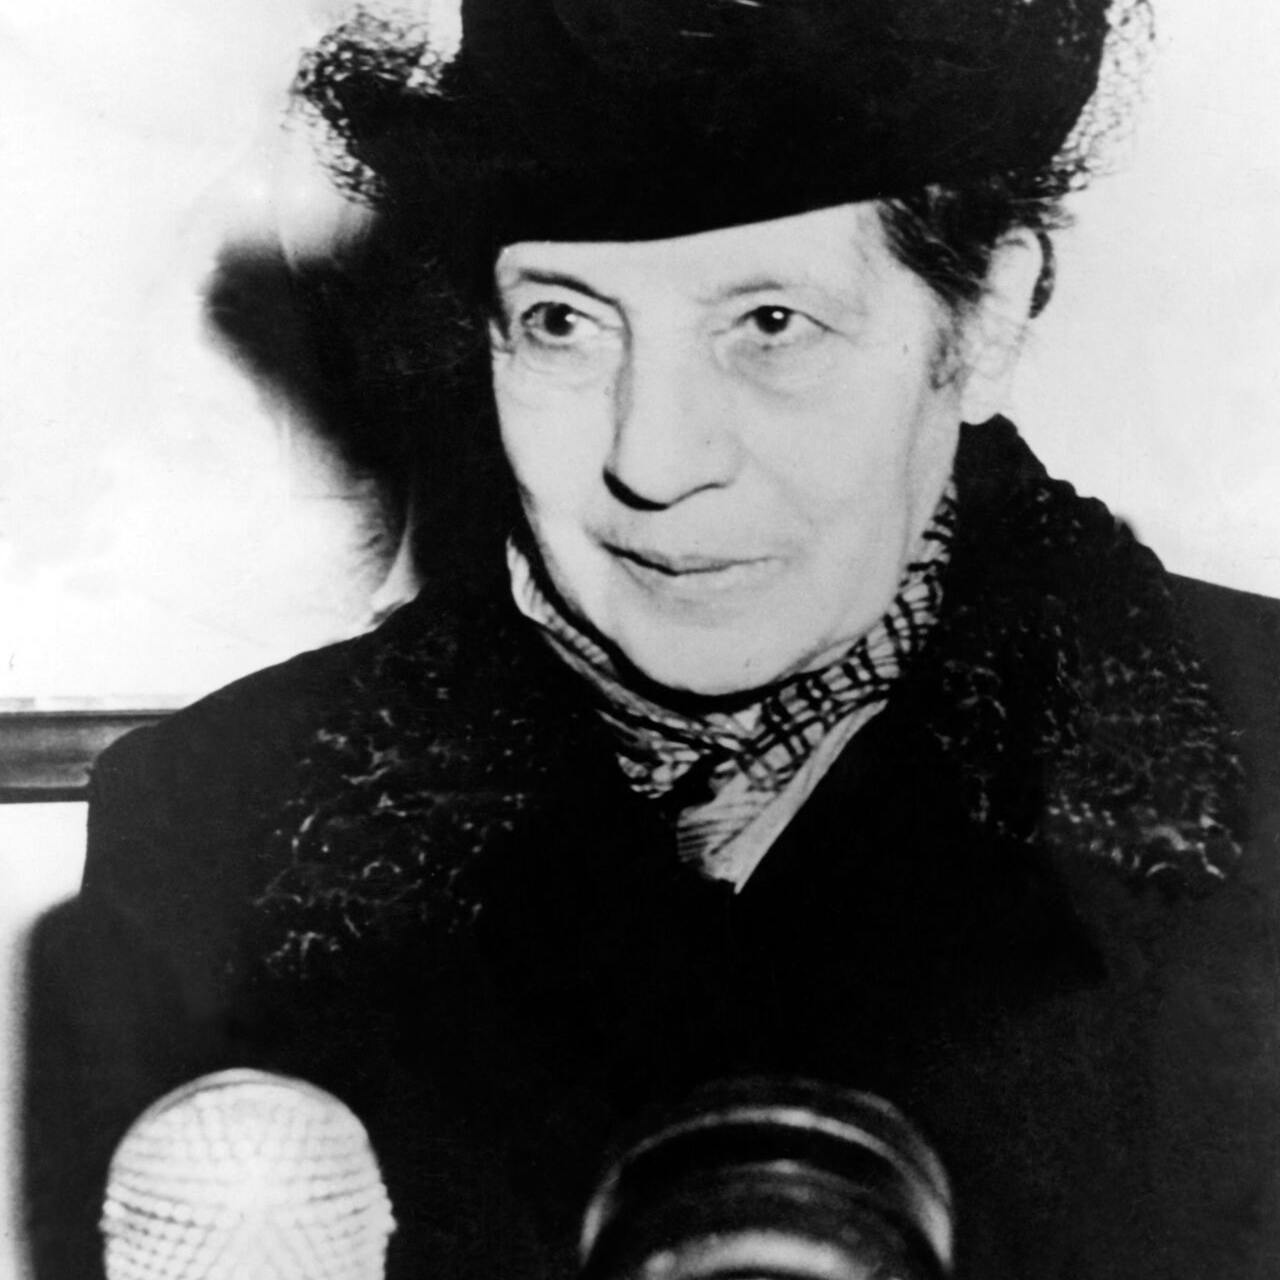 Undated portrait of Austrian born, later Swedish physicist Lise Meitner (1878-1968) who studied radioactivity and nuclear physics, and was part of the team that discovered nuclear fission, for which her colleague Otto Hahn was awarded the 1944 Nobel Prize in Chemistry. AFP